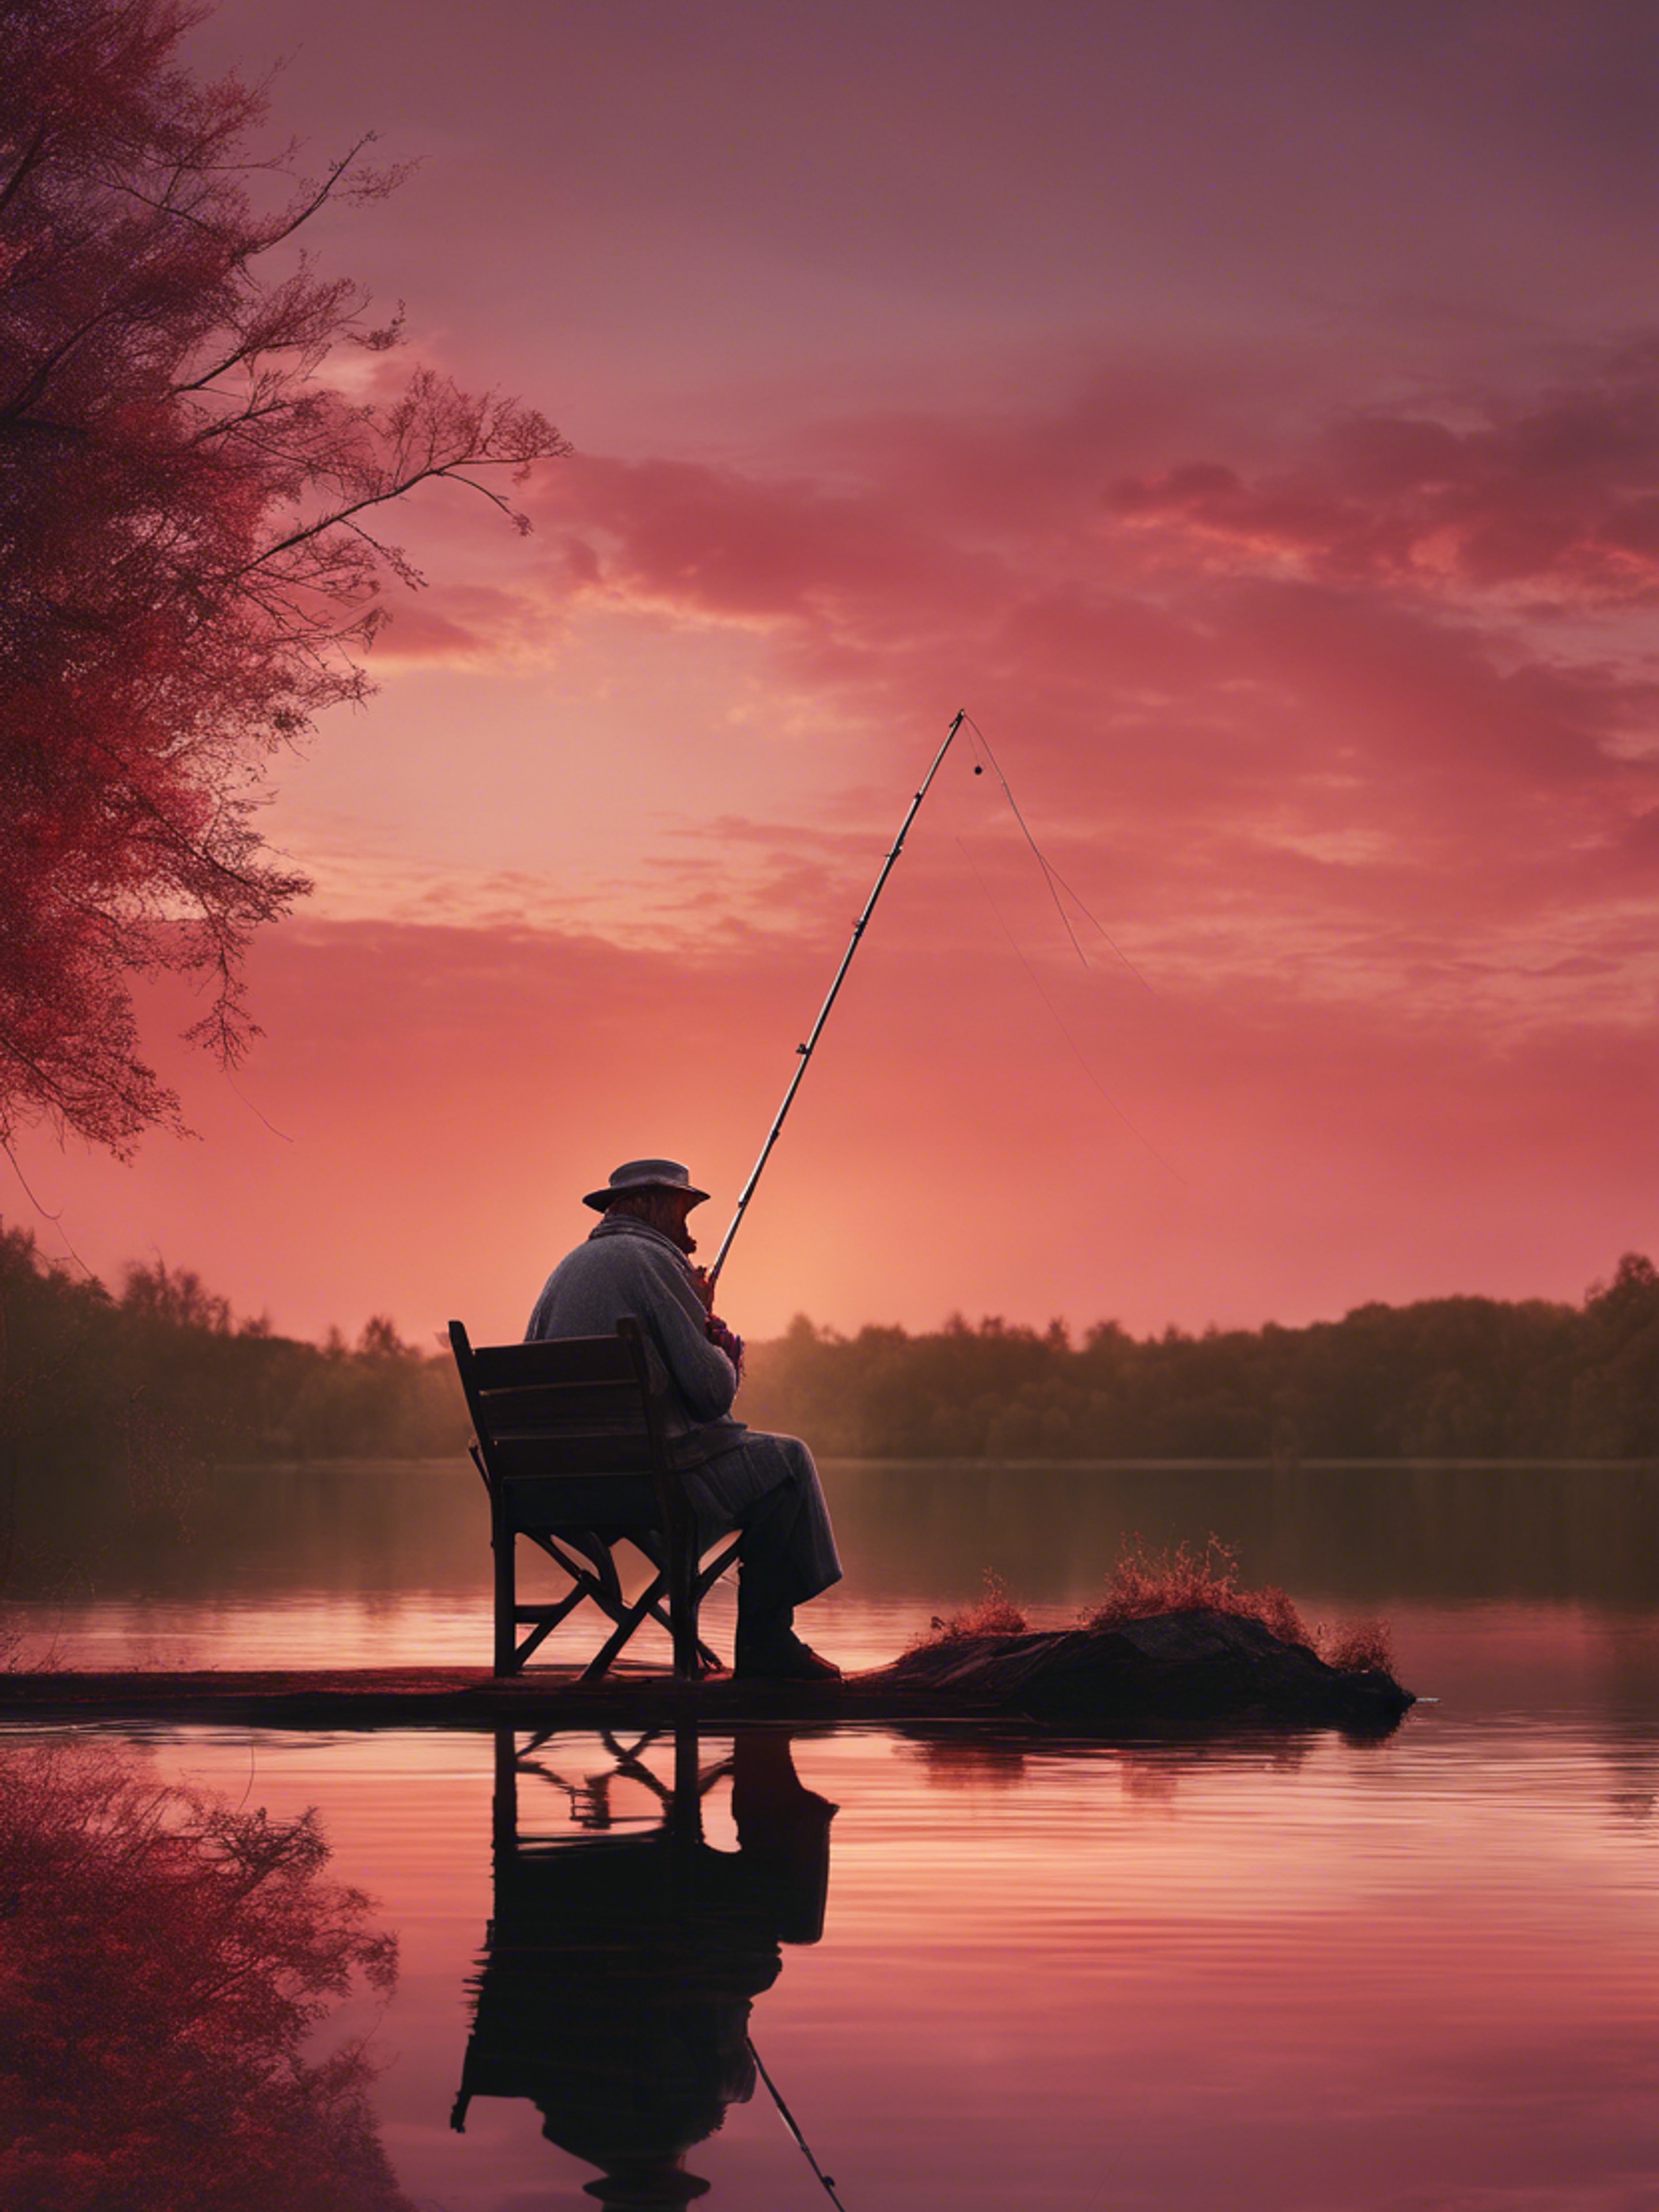 An old man maintaining a lonely vigil beside a lake under a ruby-red sunset, a fishing rod in his hand. ផ្ទាំង​រូបភាព[4b1db37a85dd45b294cb]